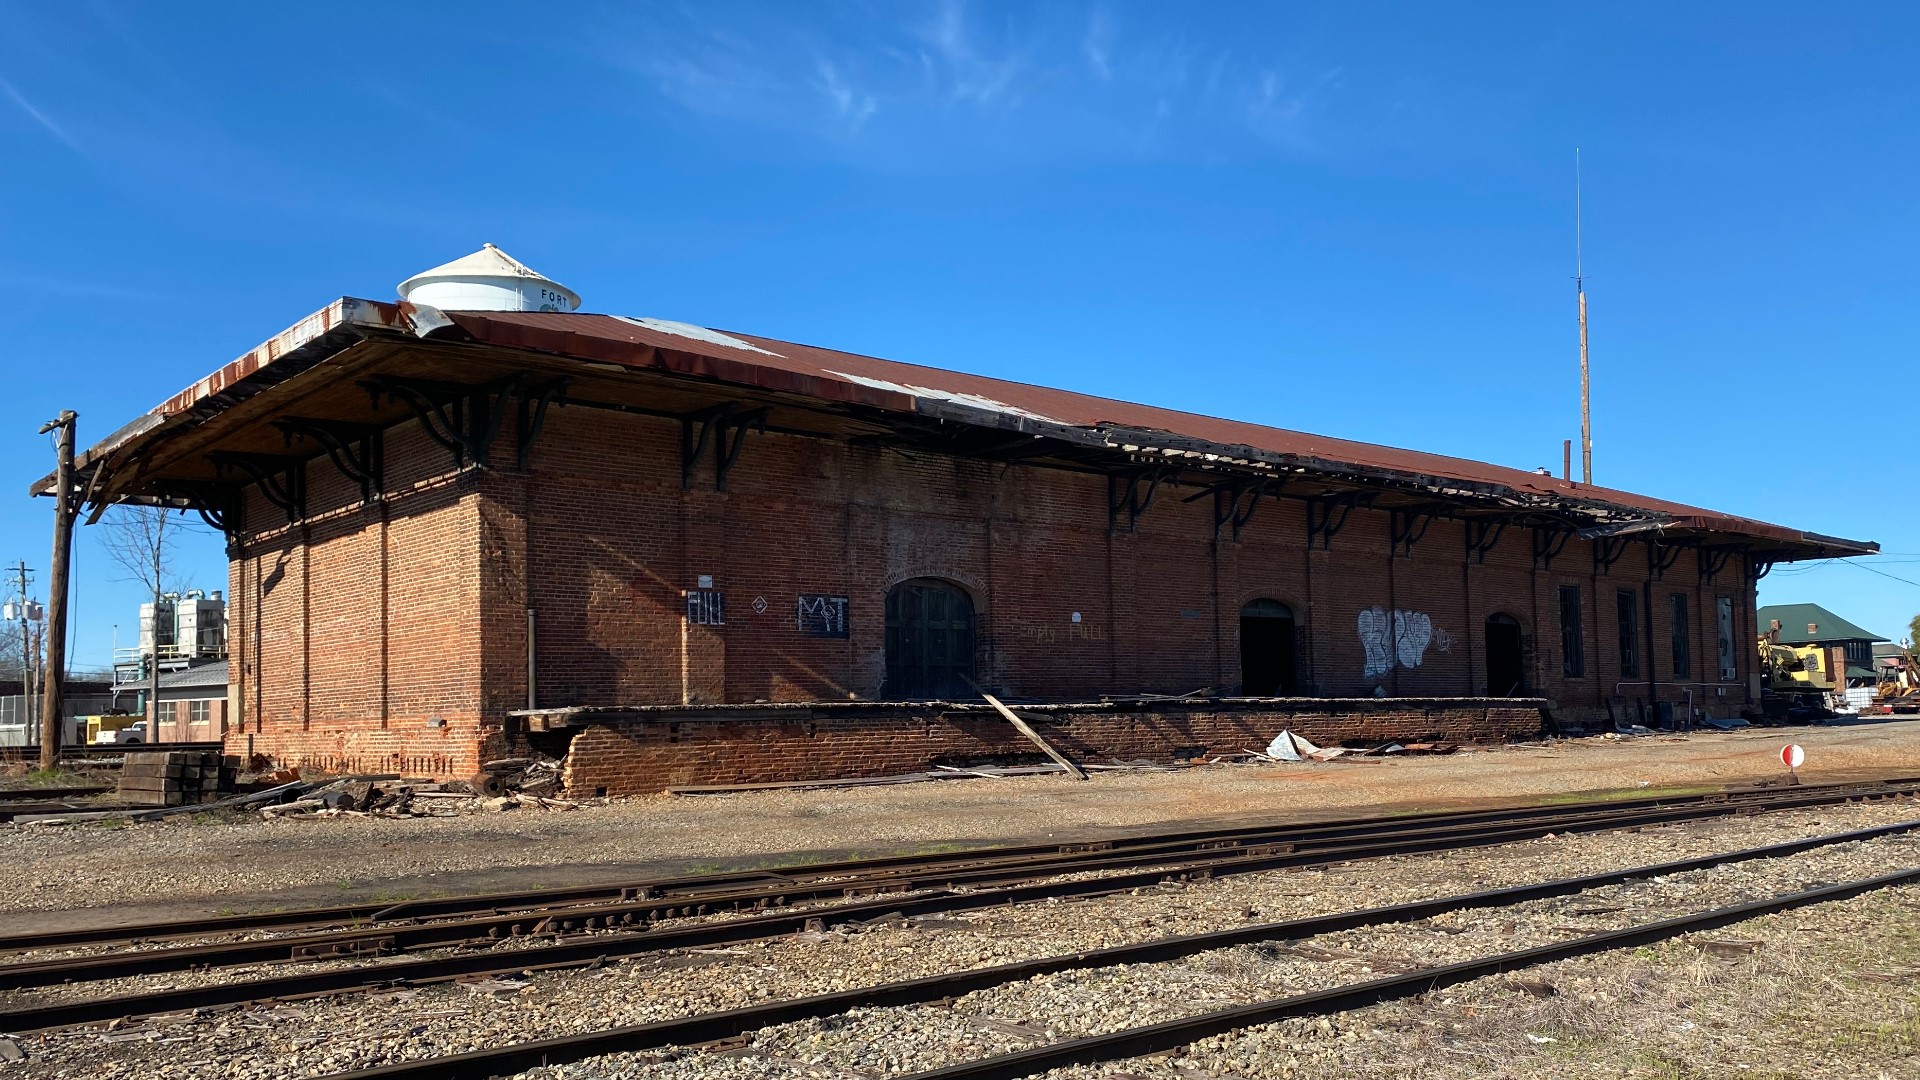 In Fort Valley, the Downtown Development Authority says they are weighing all their options to figure out what to do with the freight depot.